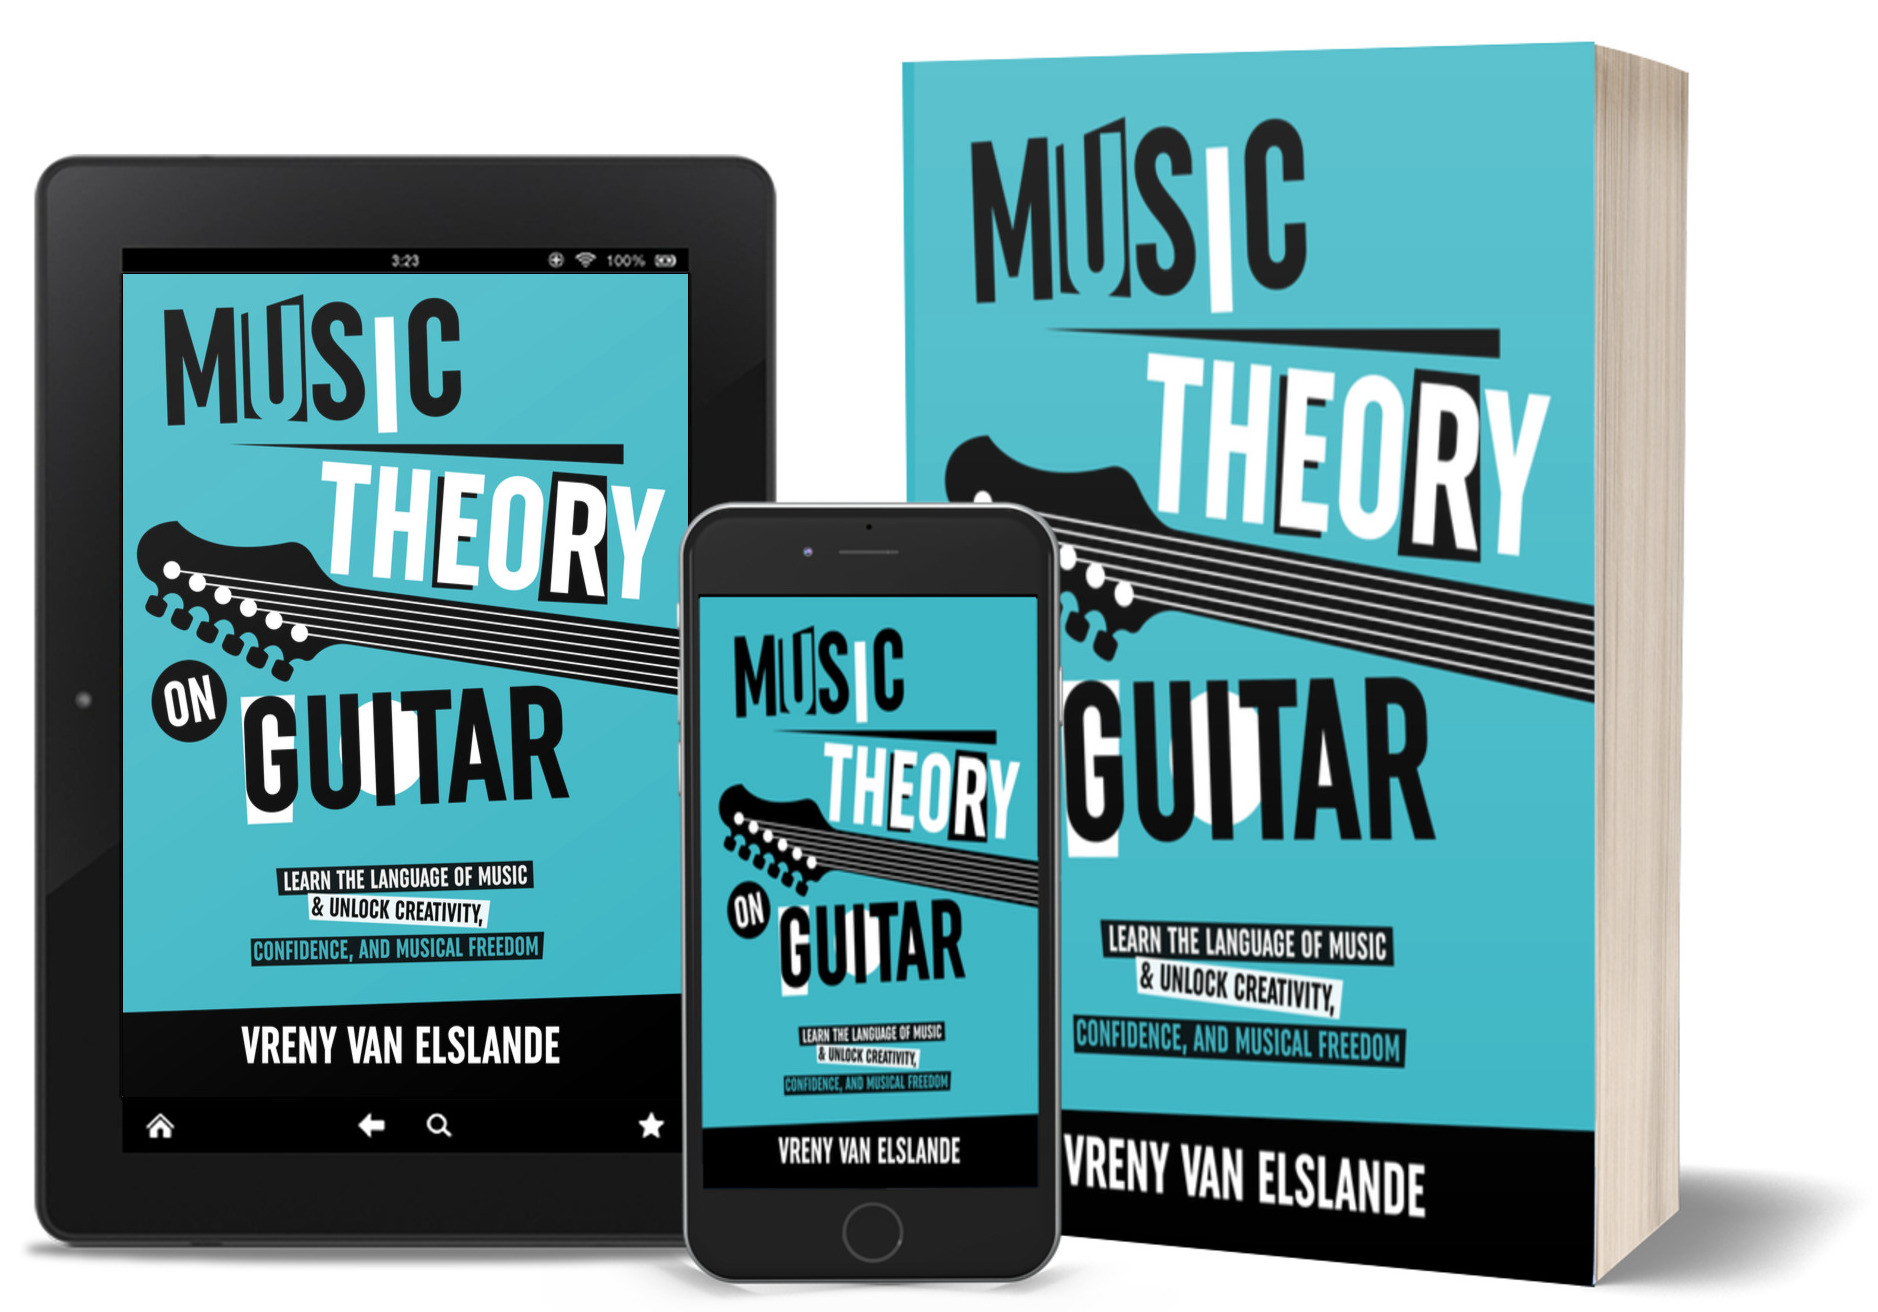 Music Theory on Guitar